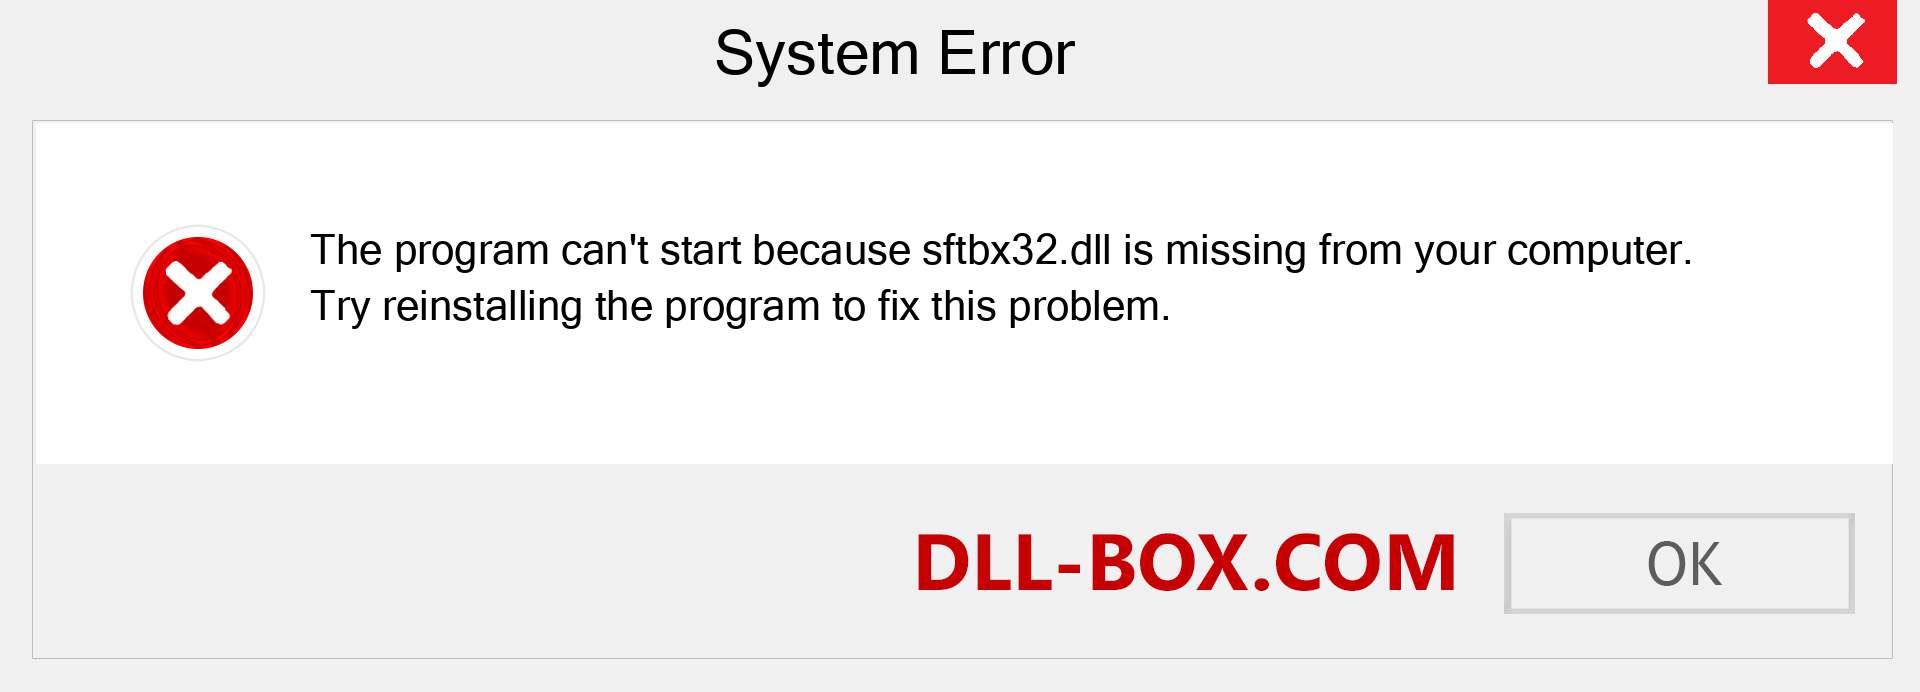  sftbx32.dll file is missing?. Download for Windows 7, 8, 10 - Fix  sftbx32 dll Missing Error on Windows, photos, images